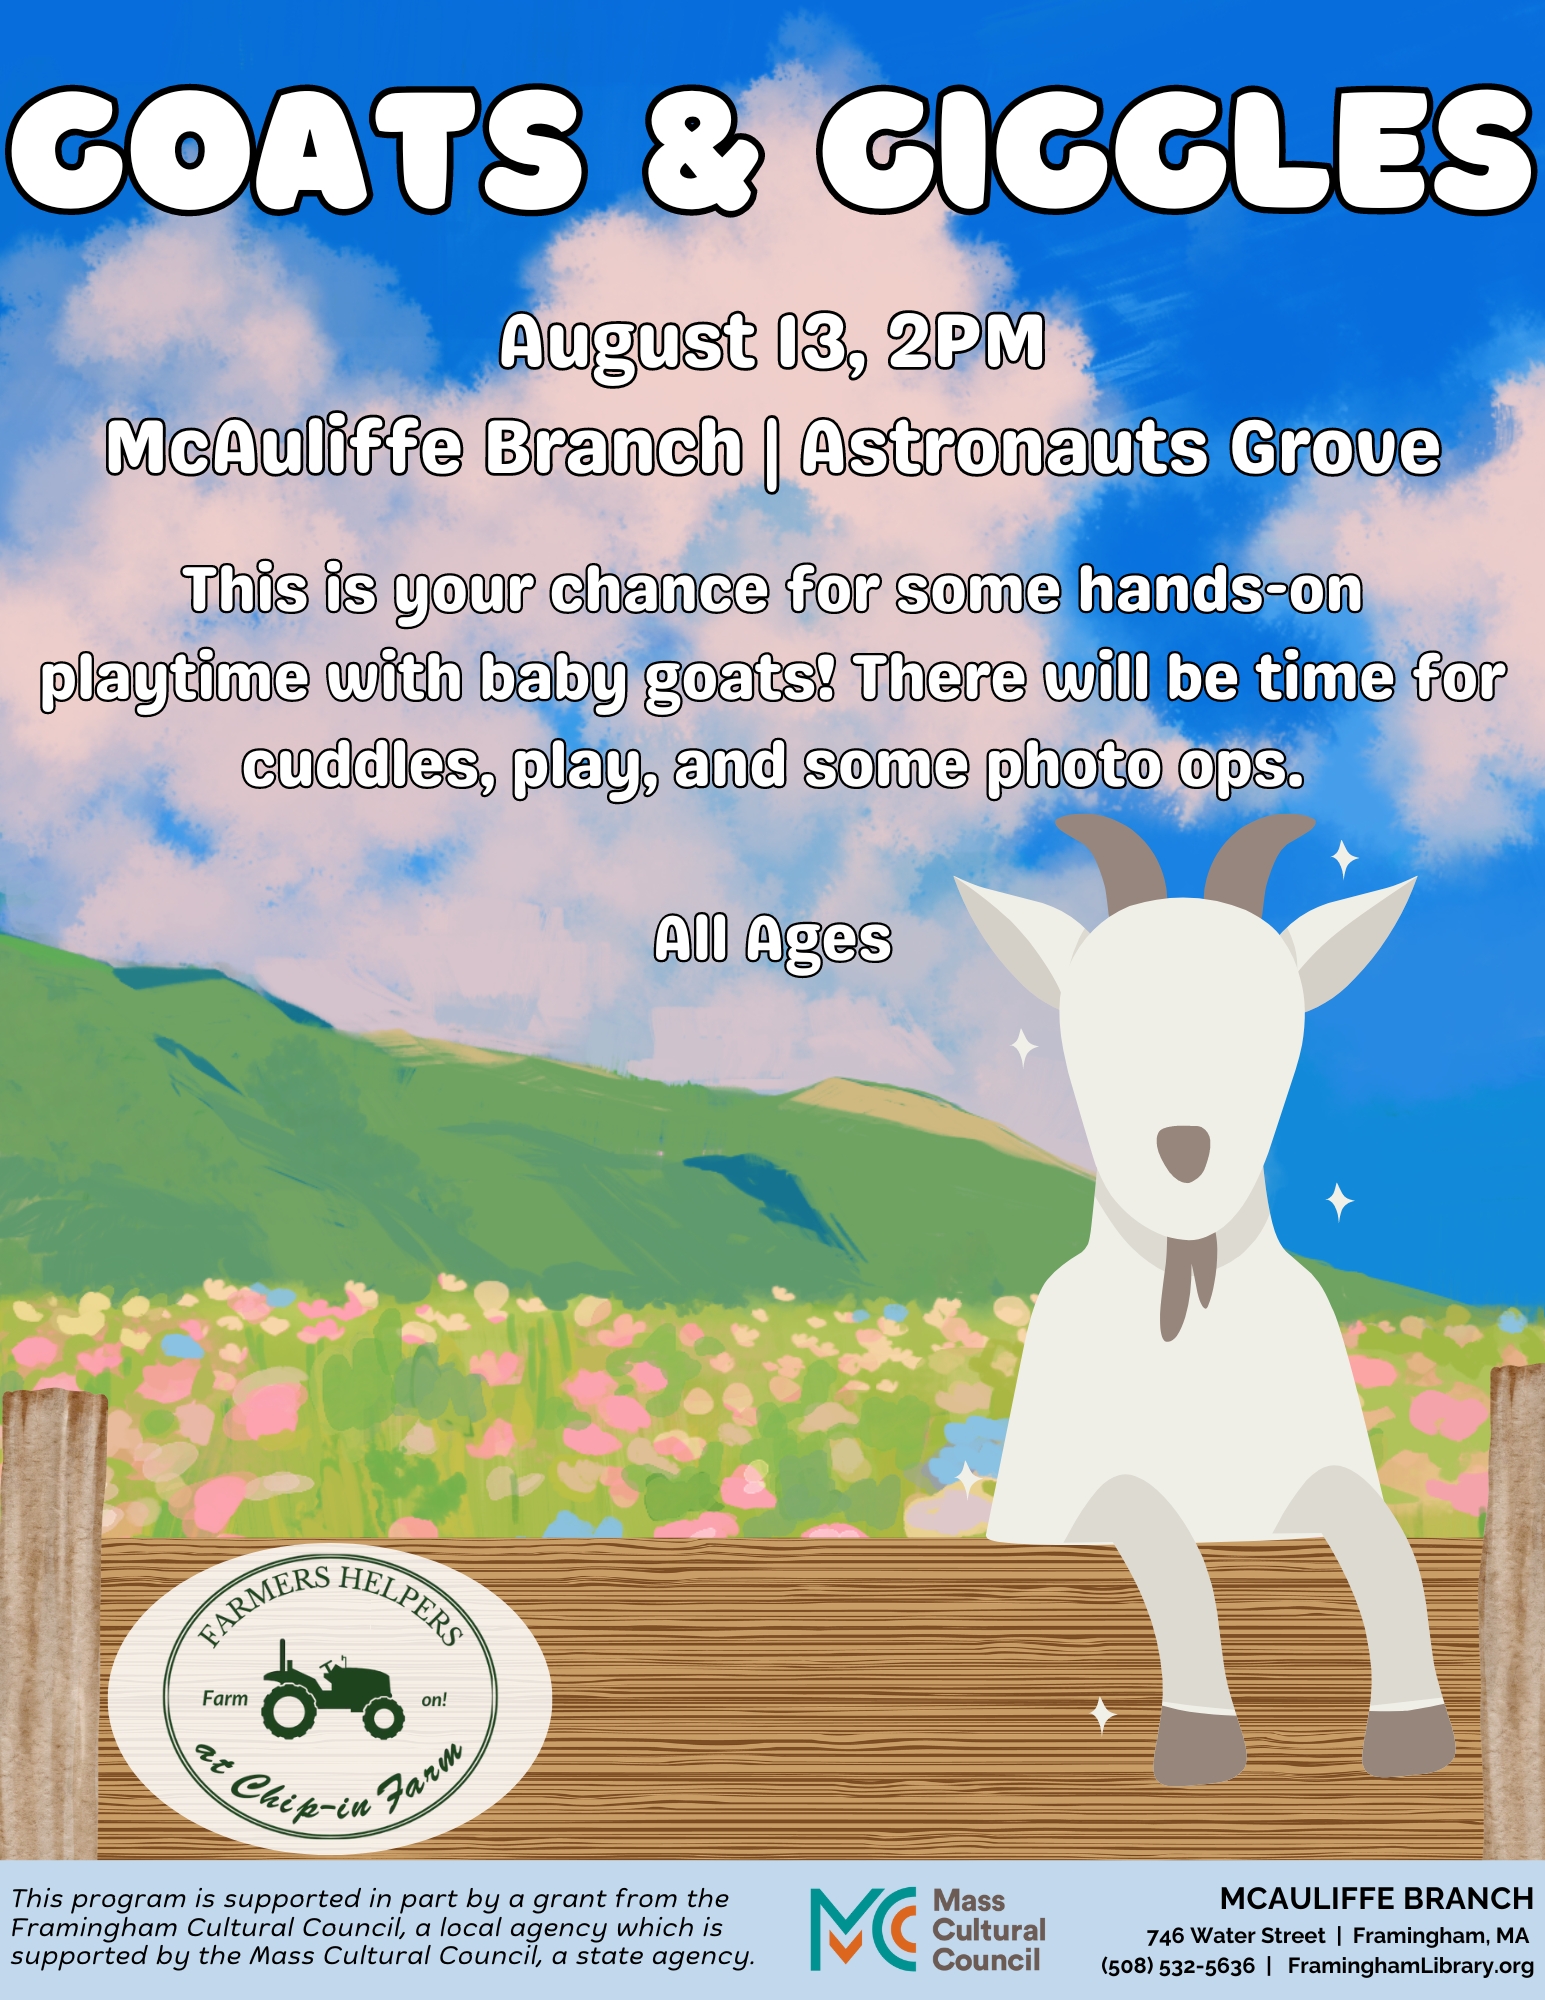 Goats & Giggles—DATE CHANGE TO AUGUST 13th AT 2PM thumbnail Photo